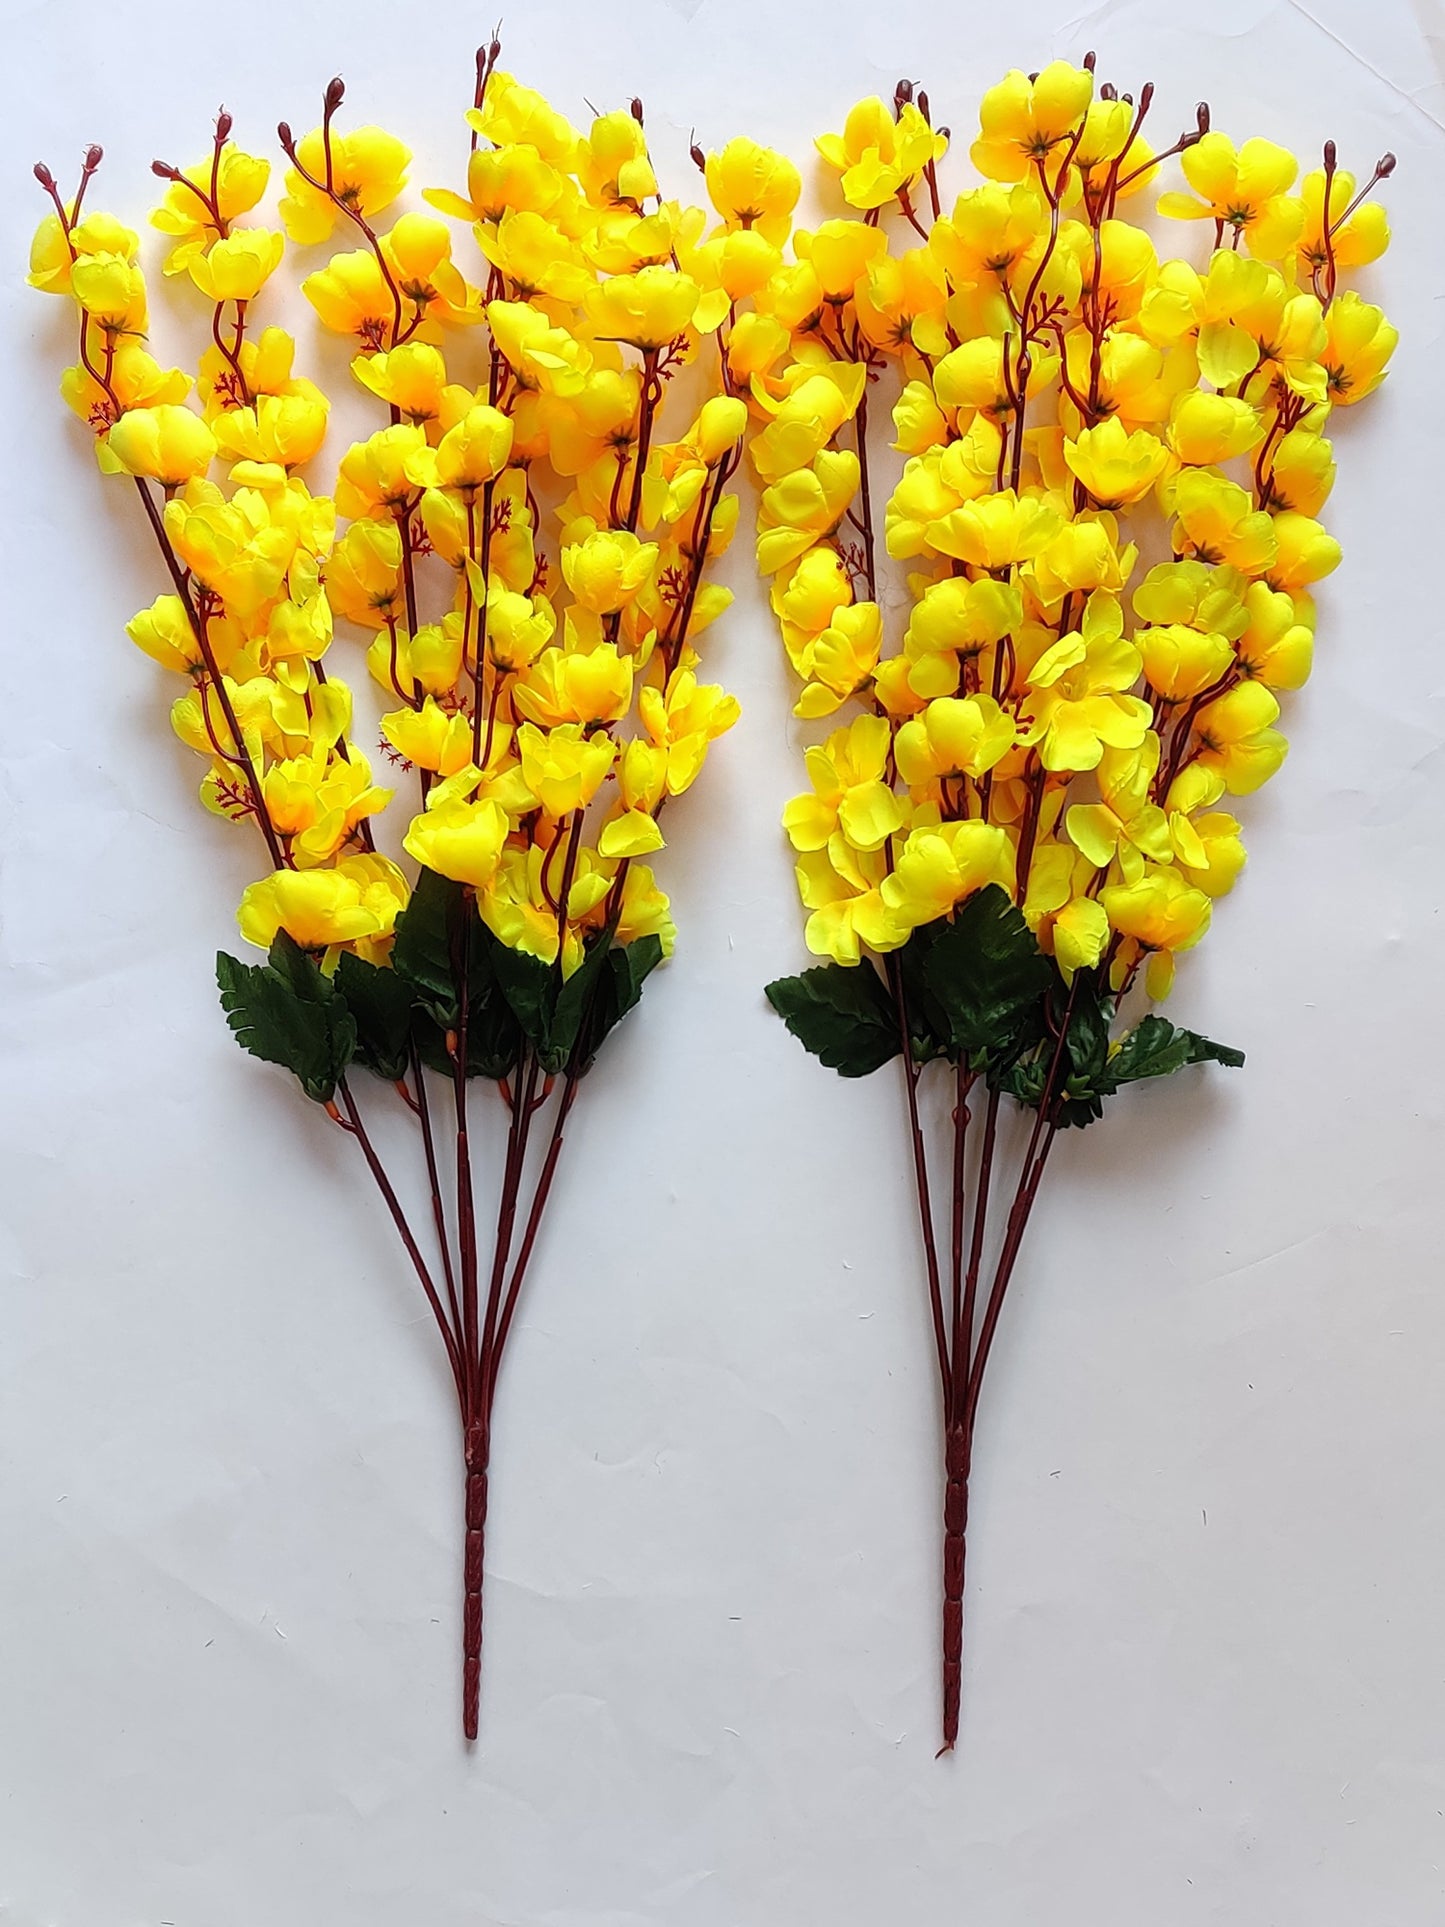 ARTSY® Artificial Flowers For Home Decoration Cherry Blossom Flower Bunch For Vase , Office Decor, Without VASE, Combo (Yellow , Pack of 2 Pieces)